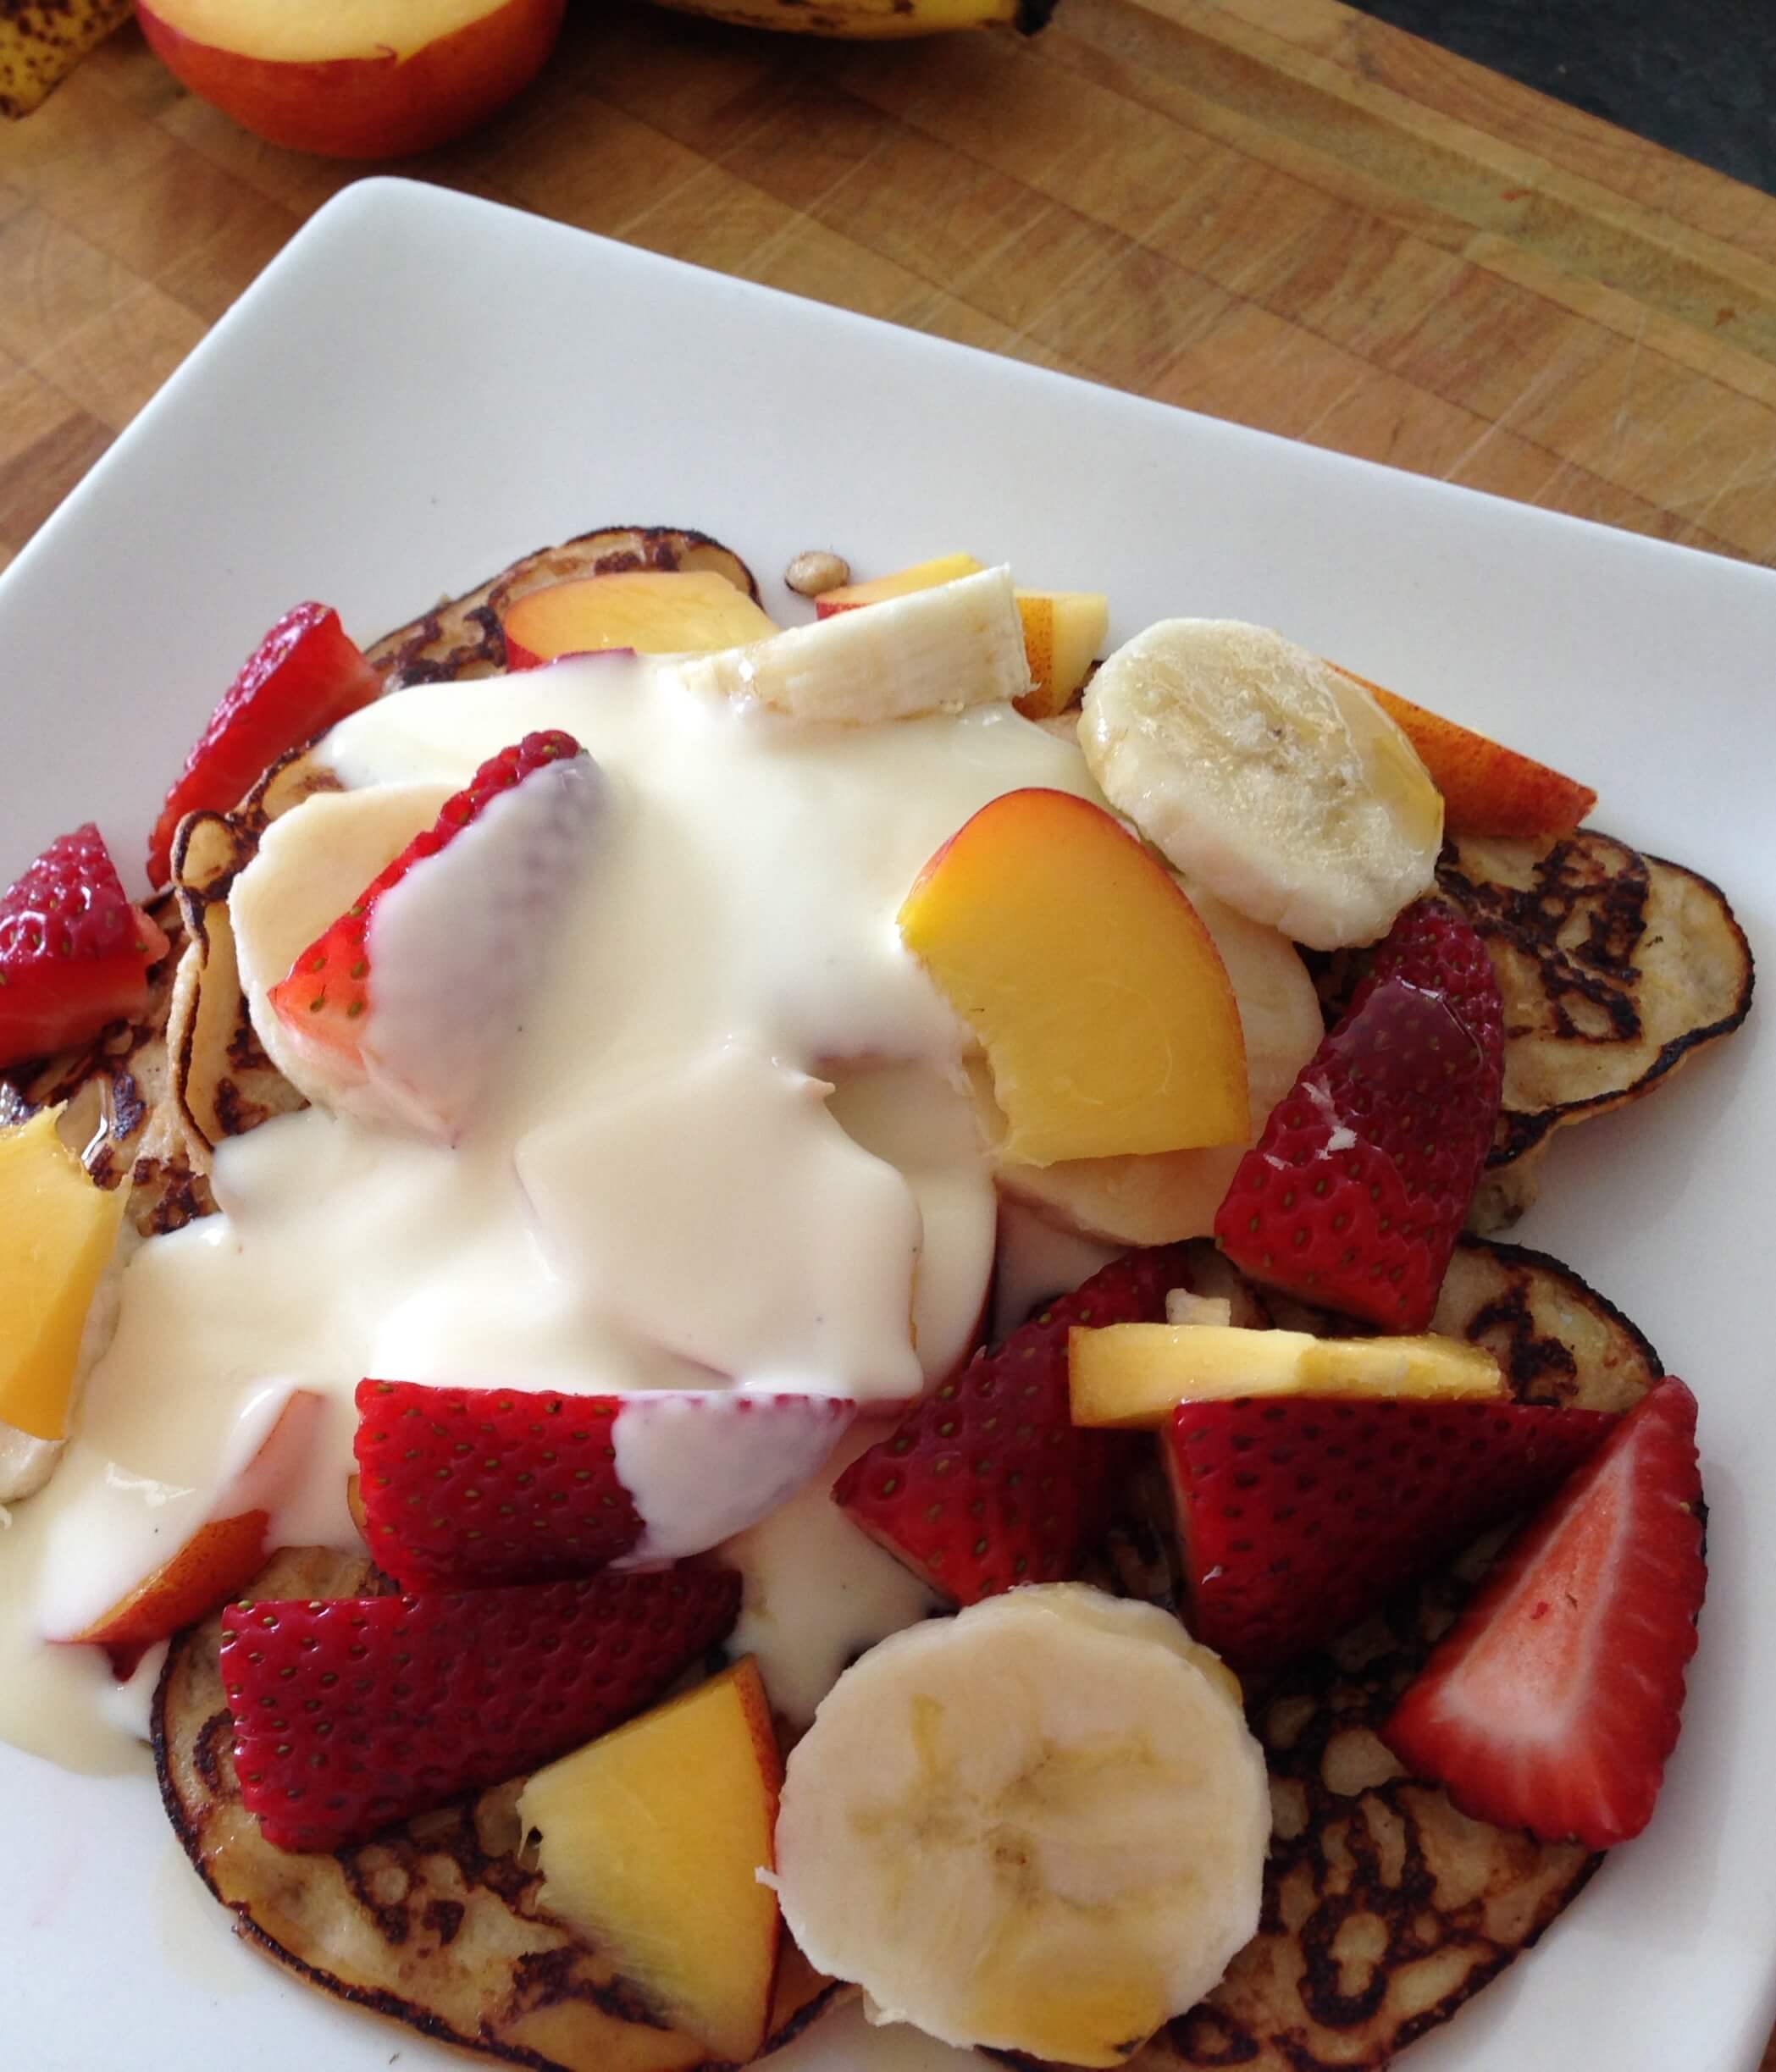 pancakes topped with strawberries, banana, nectarine and kefir